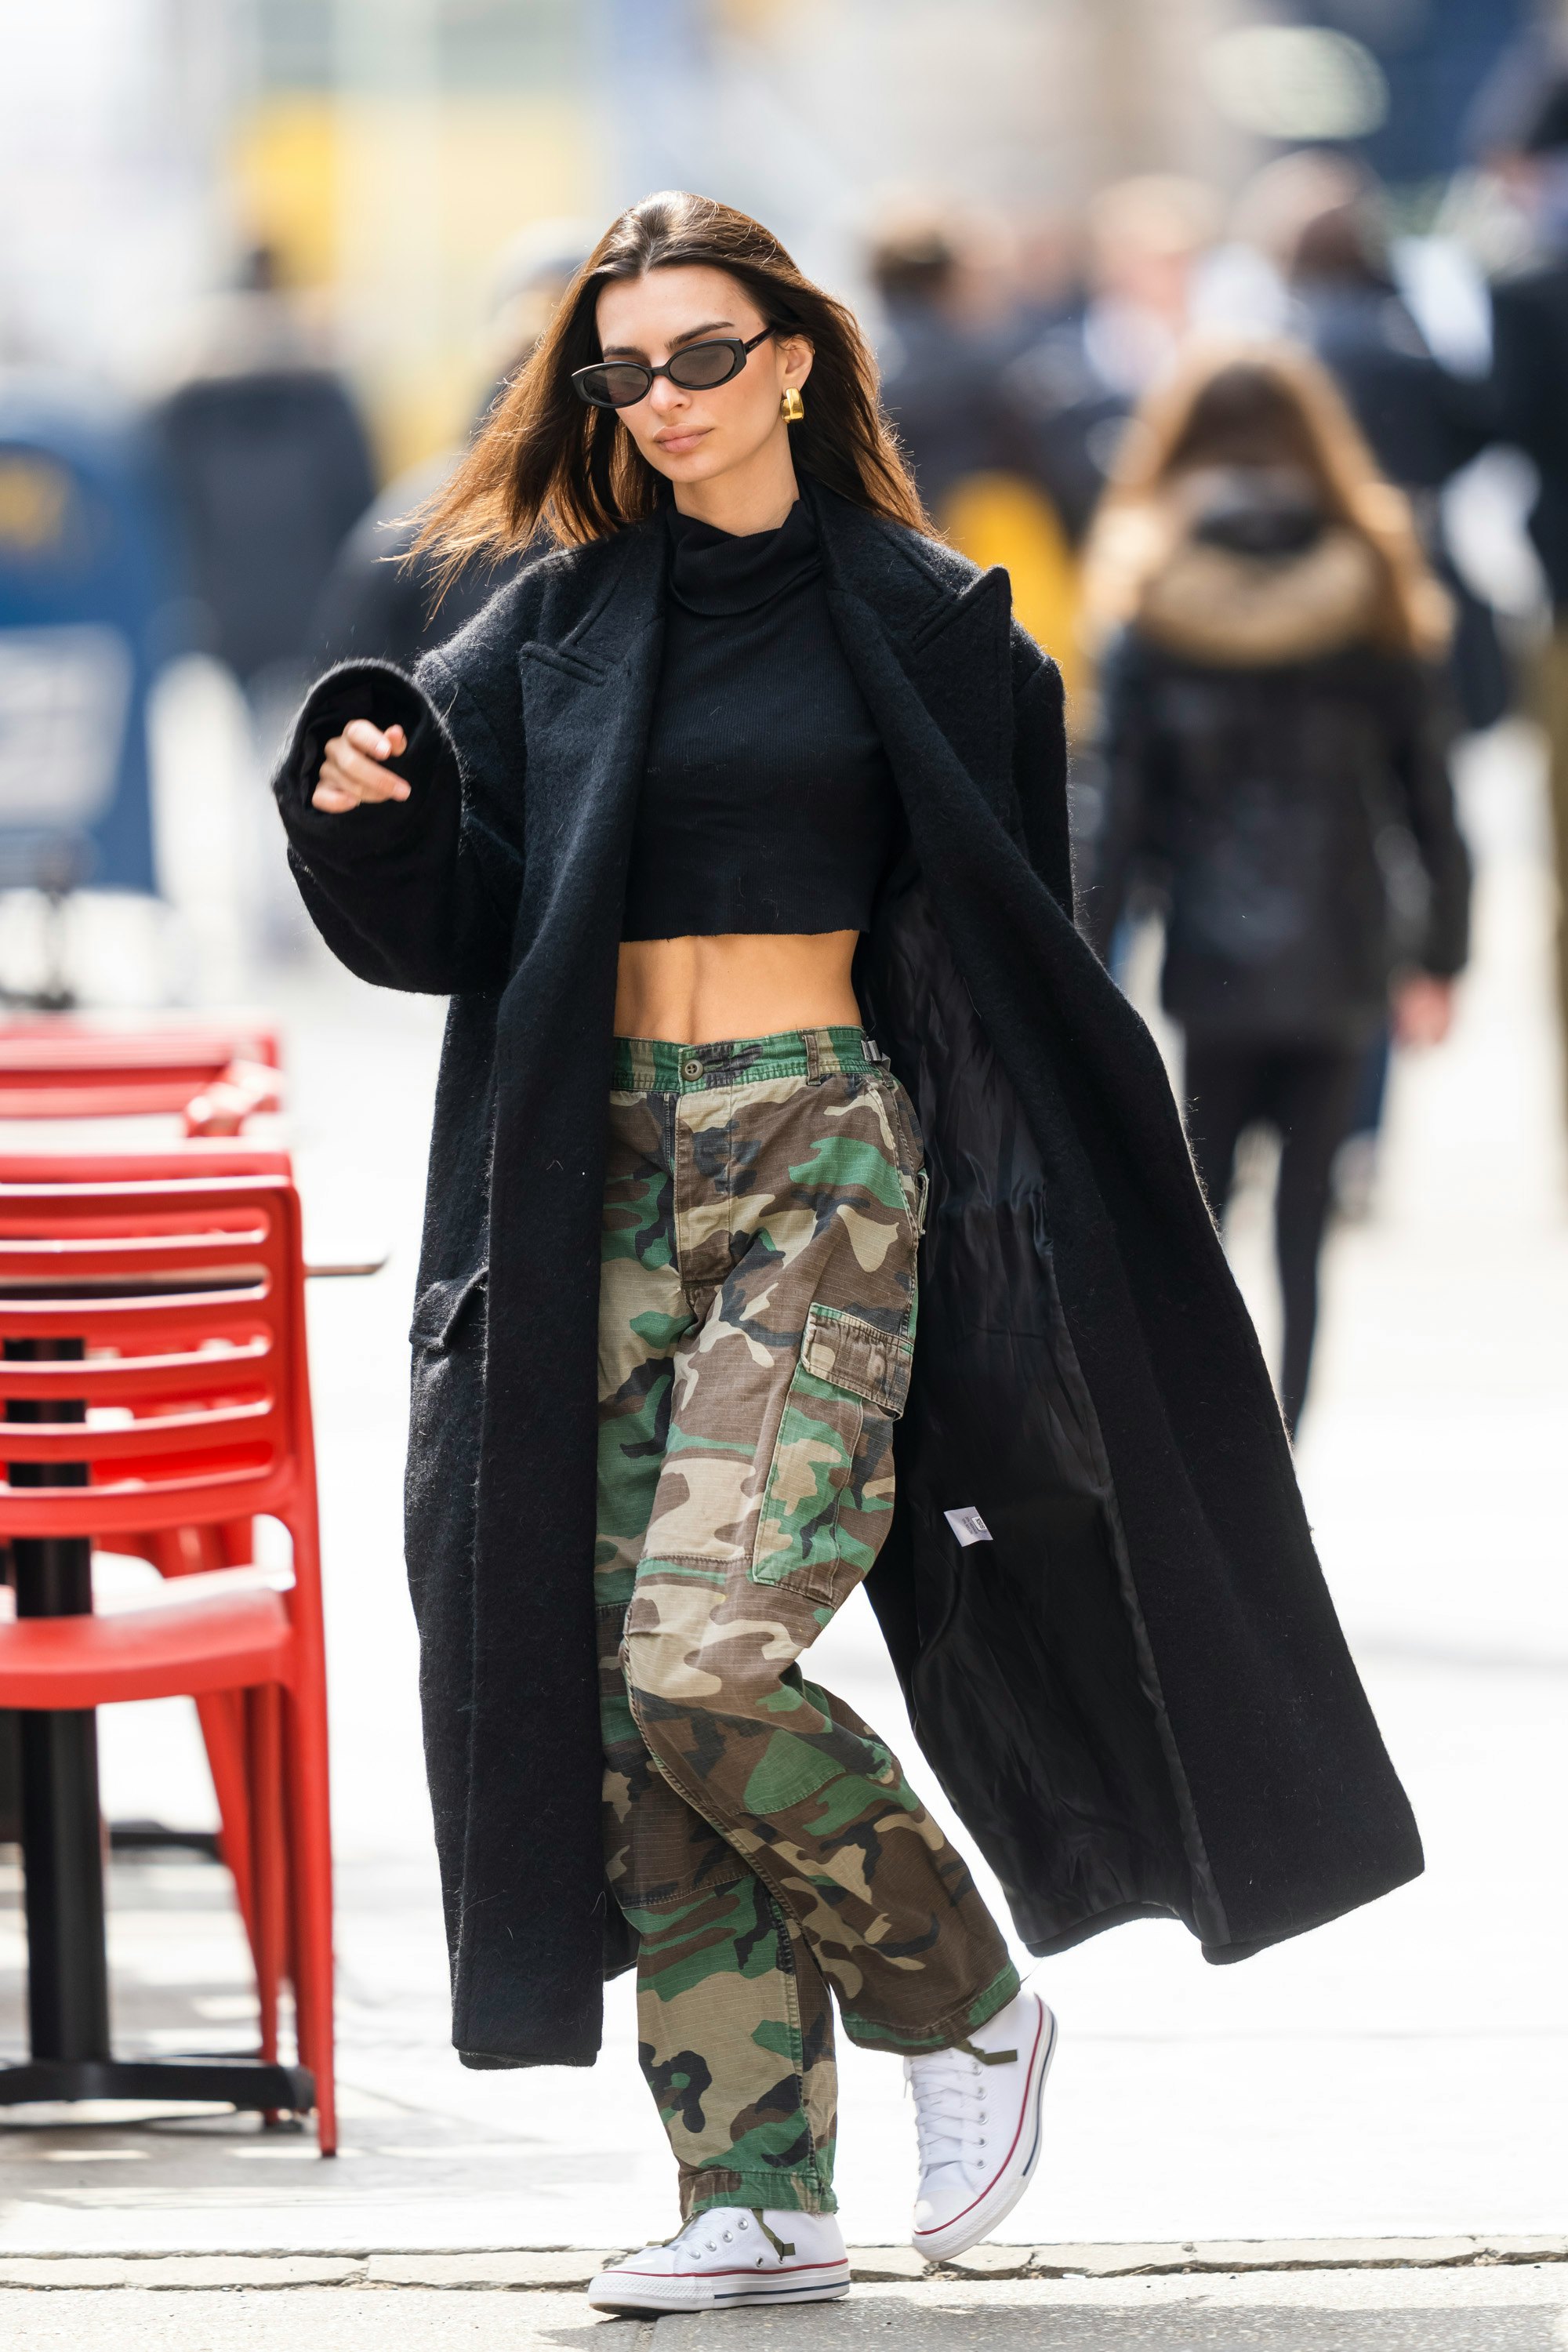 Emily Ratajkowski seen wearing a leather jacket and camo cargo pants during  a solo outing in